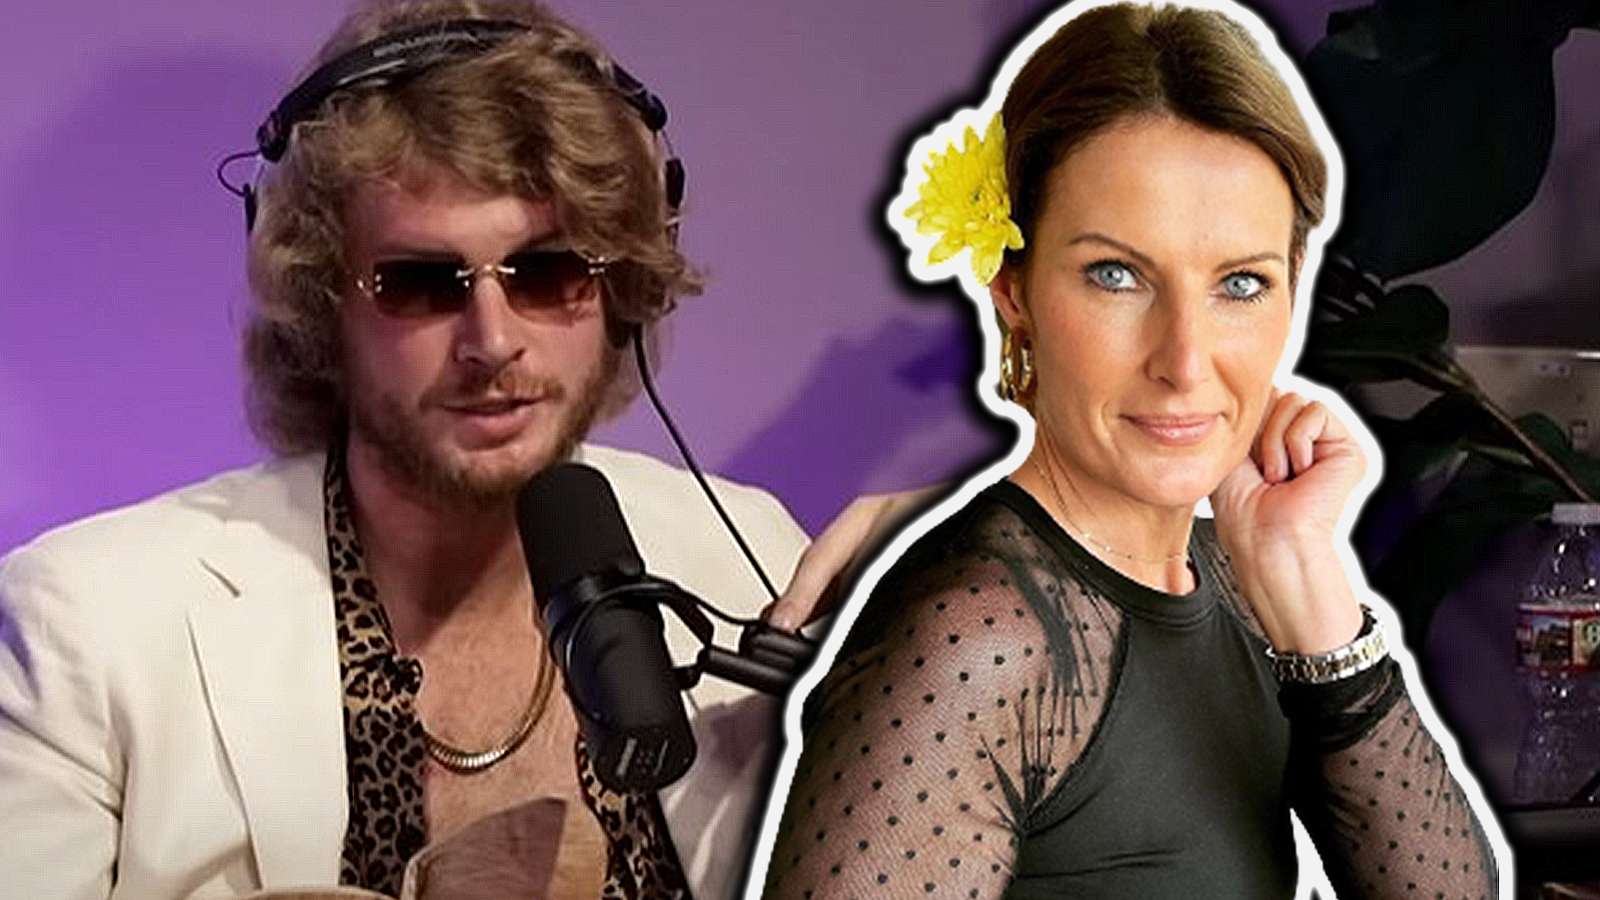 Yung Gravy and Sheri Easterling have reportedly broken up